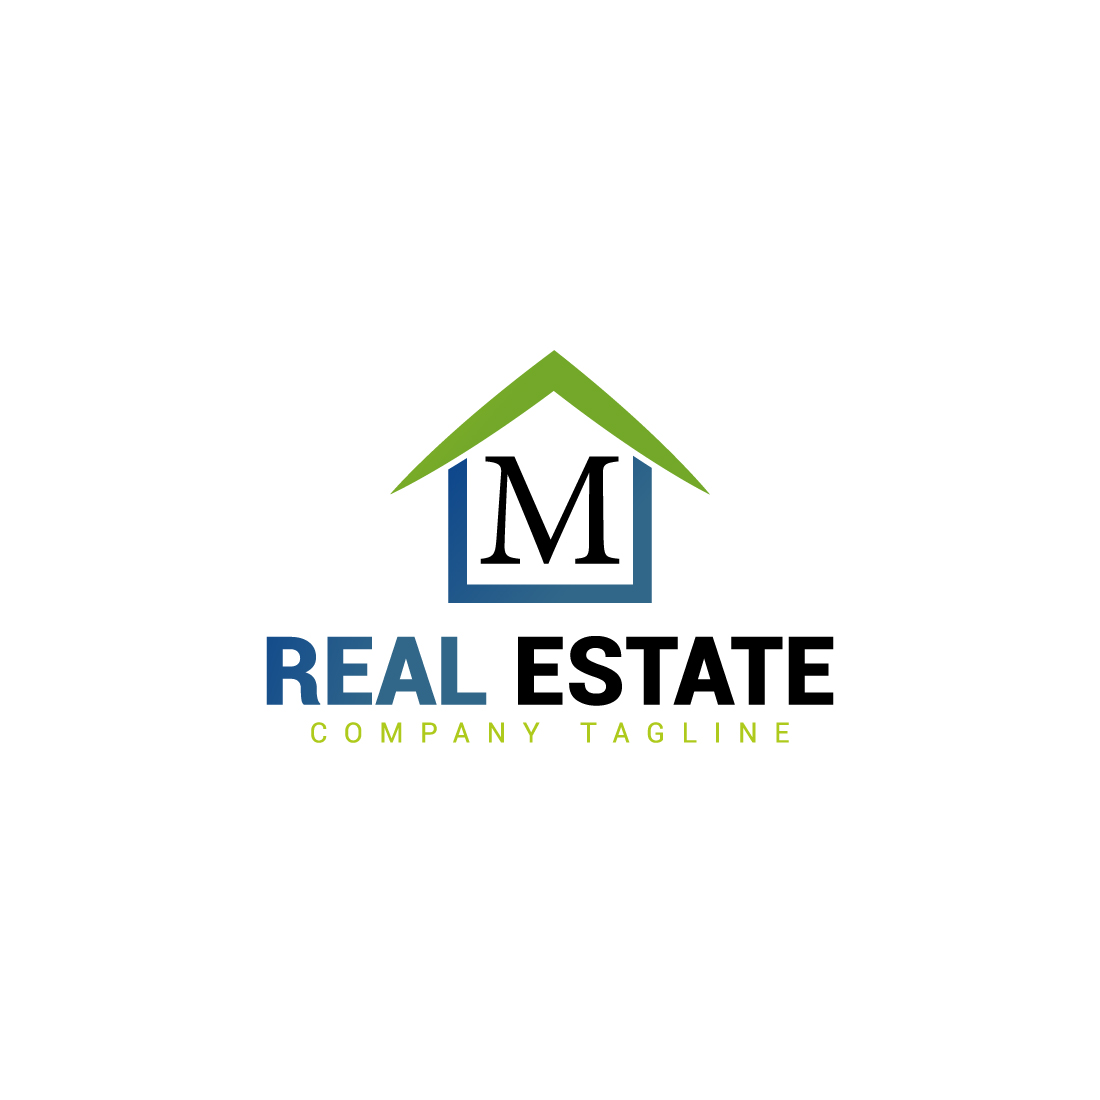 Real estate logo with green, dark blue color and M letter preview image.